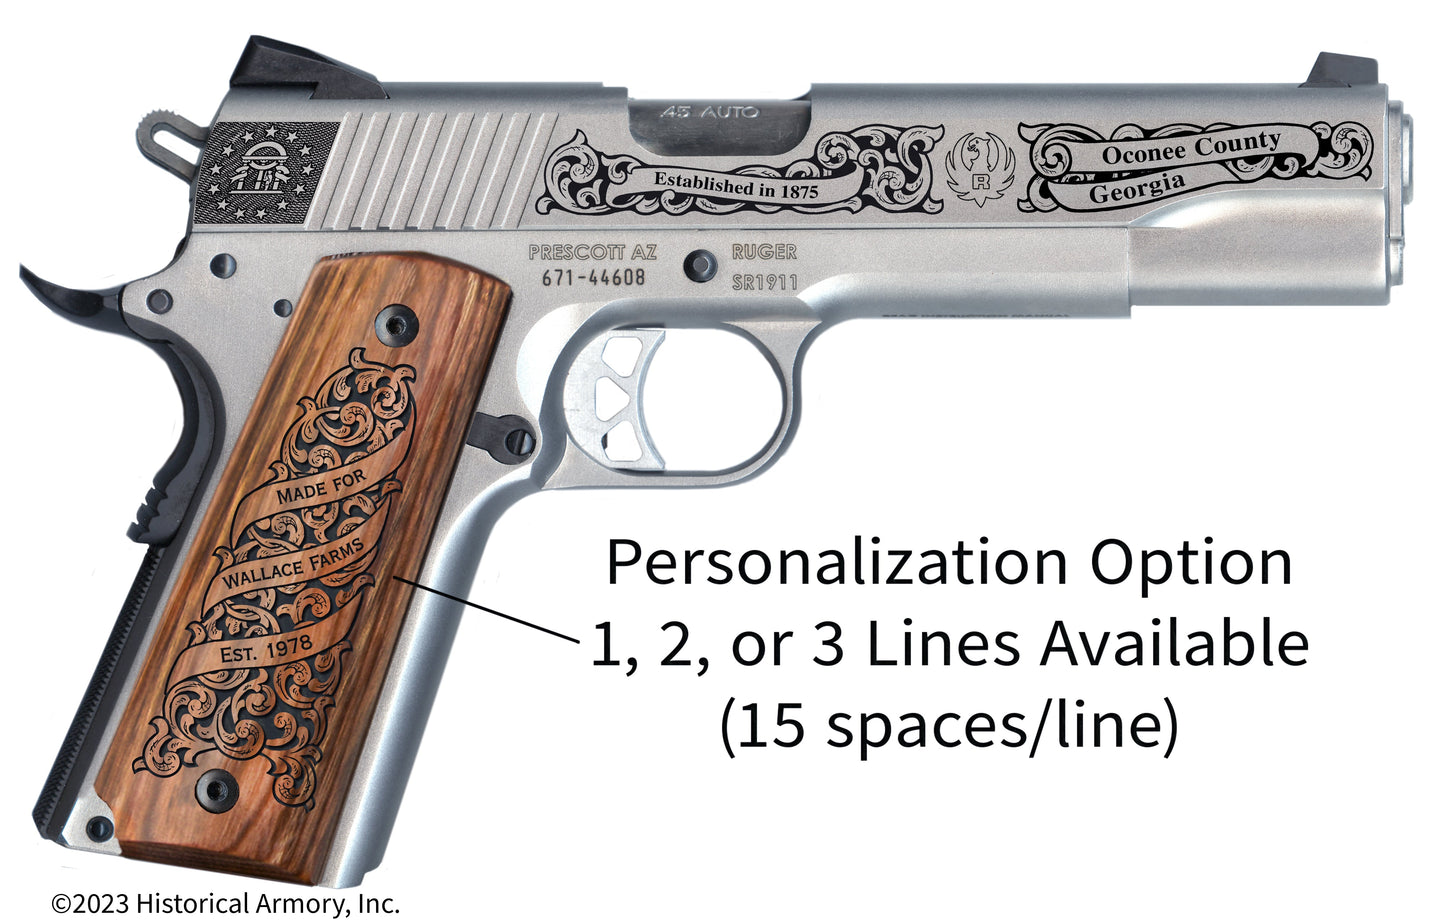 Oconee County Georgia Personalized Engraved .45 Auto Ruger 1911